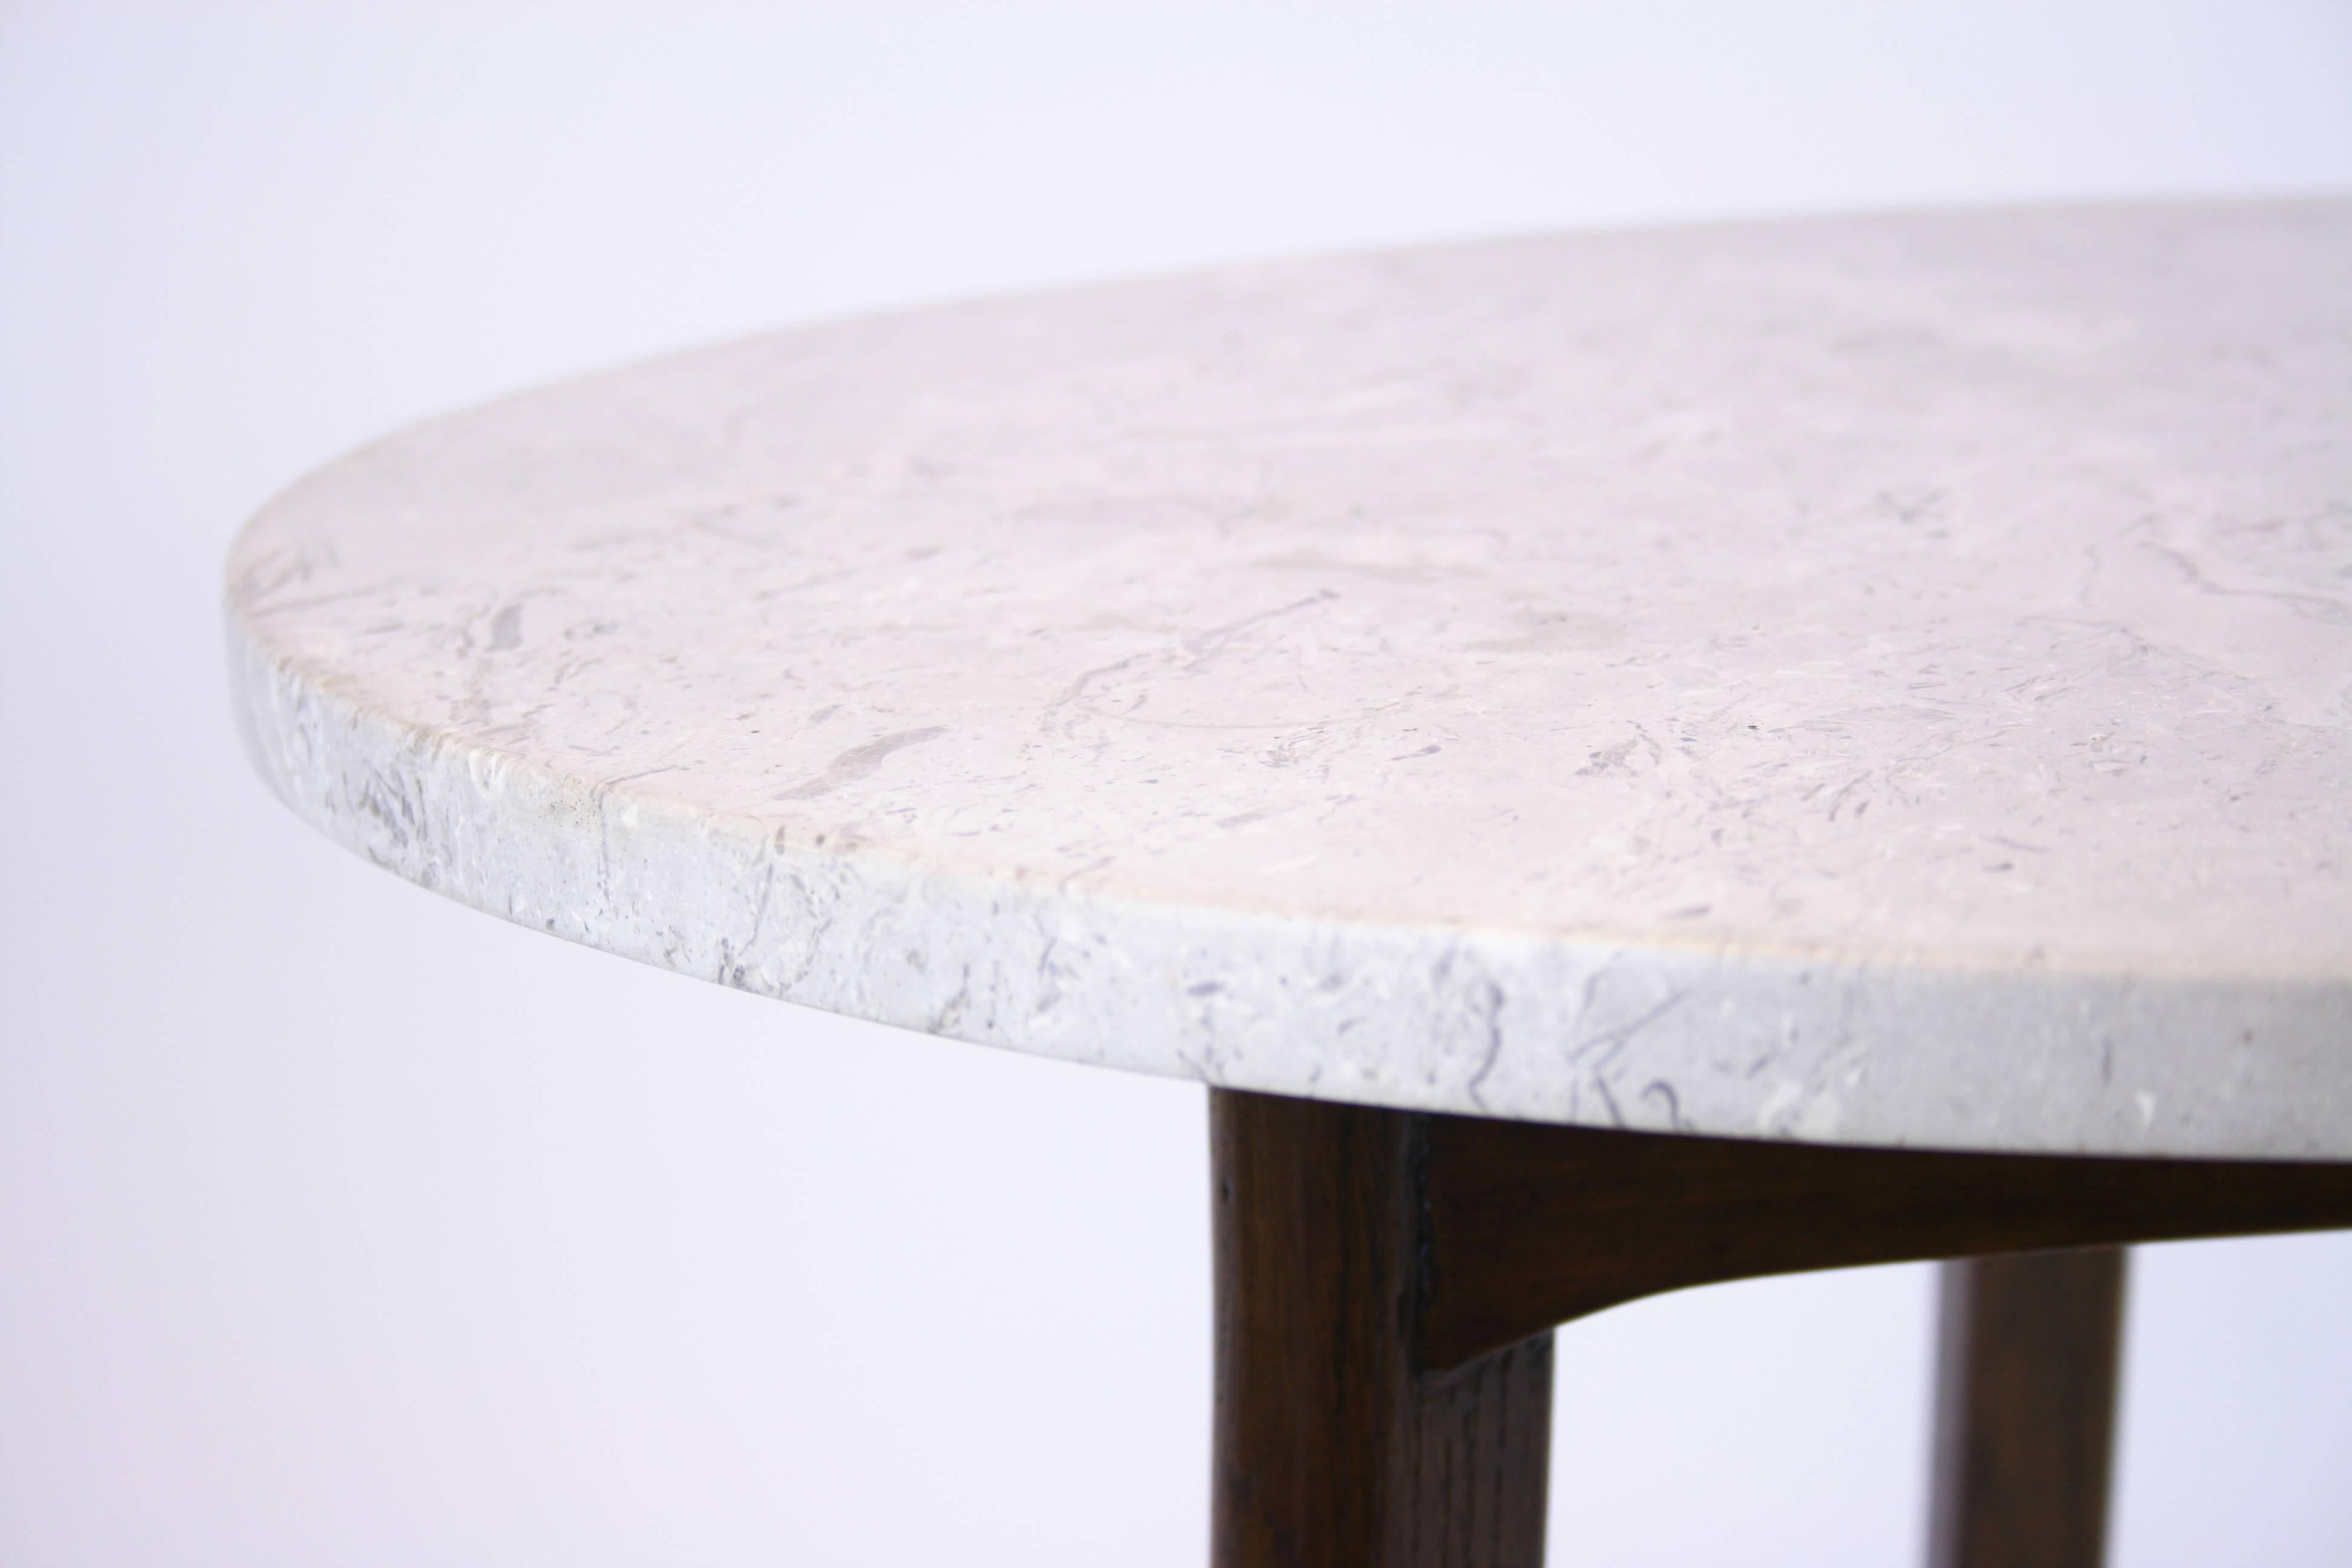 Rare occasional sidetable attributed to Josef Frank with a circular stone table top. The basis frame is made of solid oak. Thanks to its high-quality workmanship, its view can be also enjoyed from below. A real heavyweight piece in terms of